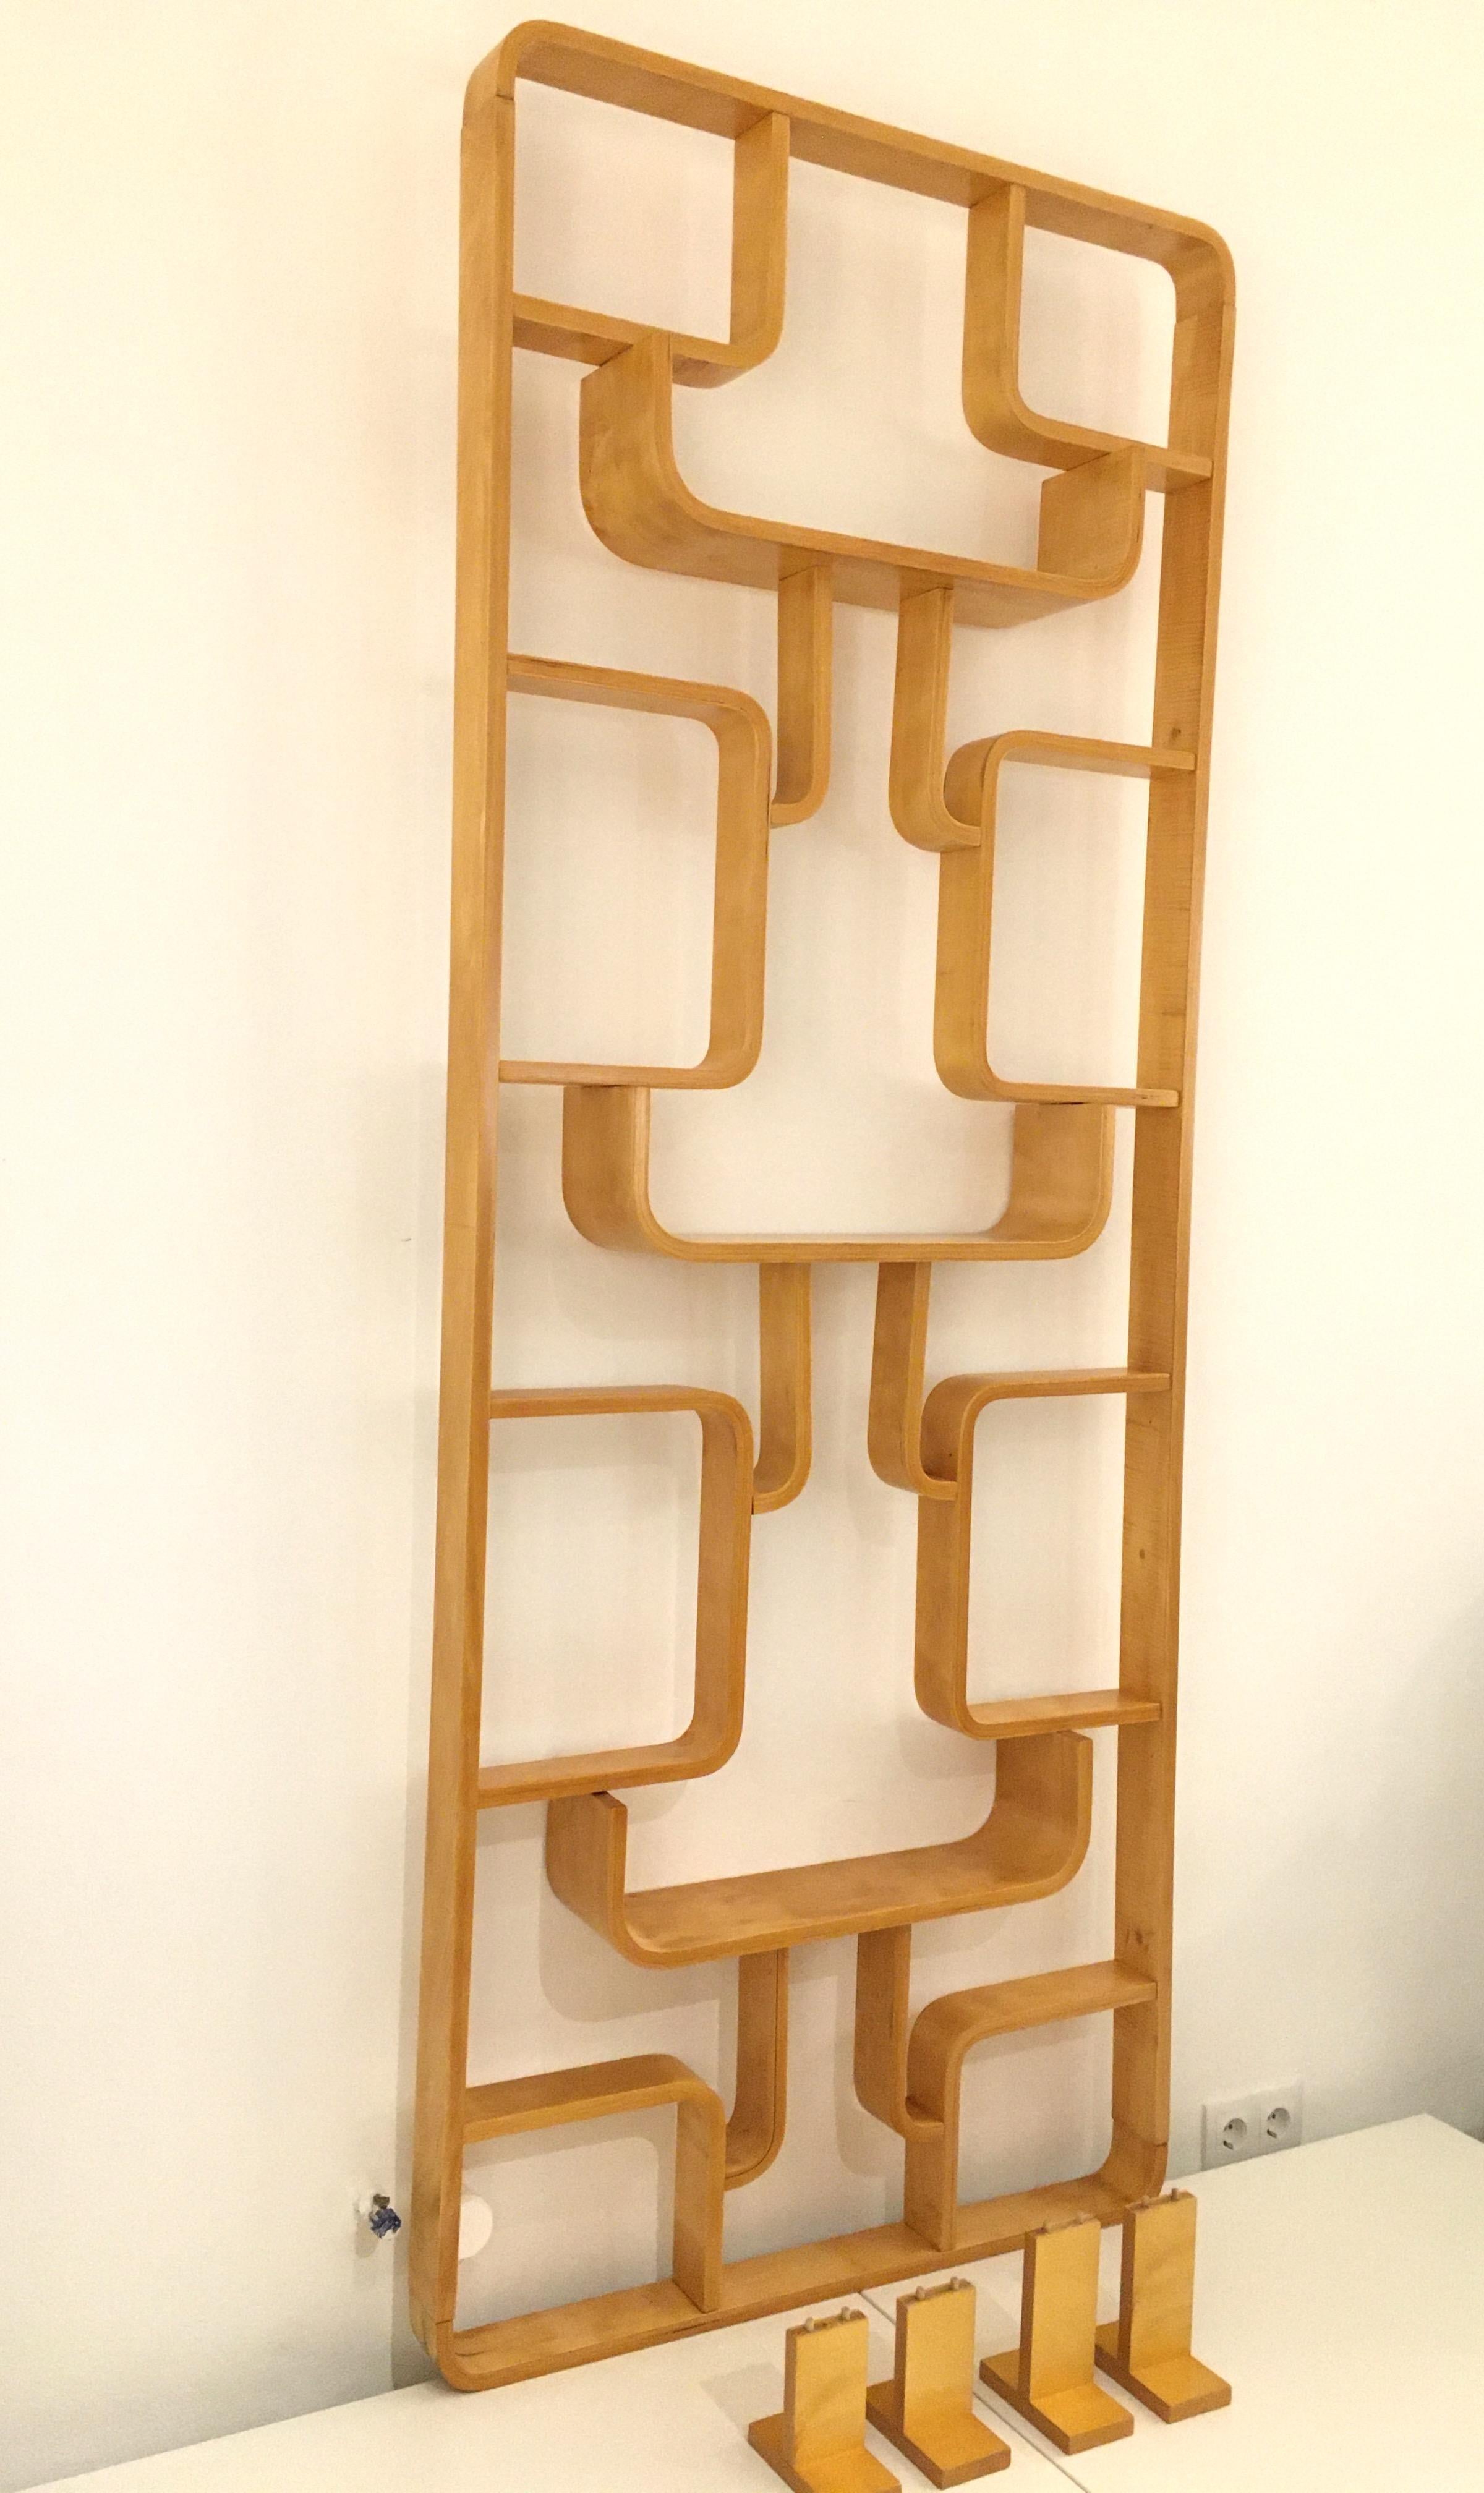 This room divider from the 1960s was designed by Ludvik Volak for Drevopodnik Holesov, in Czechoslovakia. This is made of maple veneer and with original label. Completely restored. Excellent condition. Shipping with four matching feet and in a